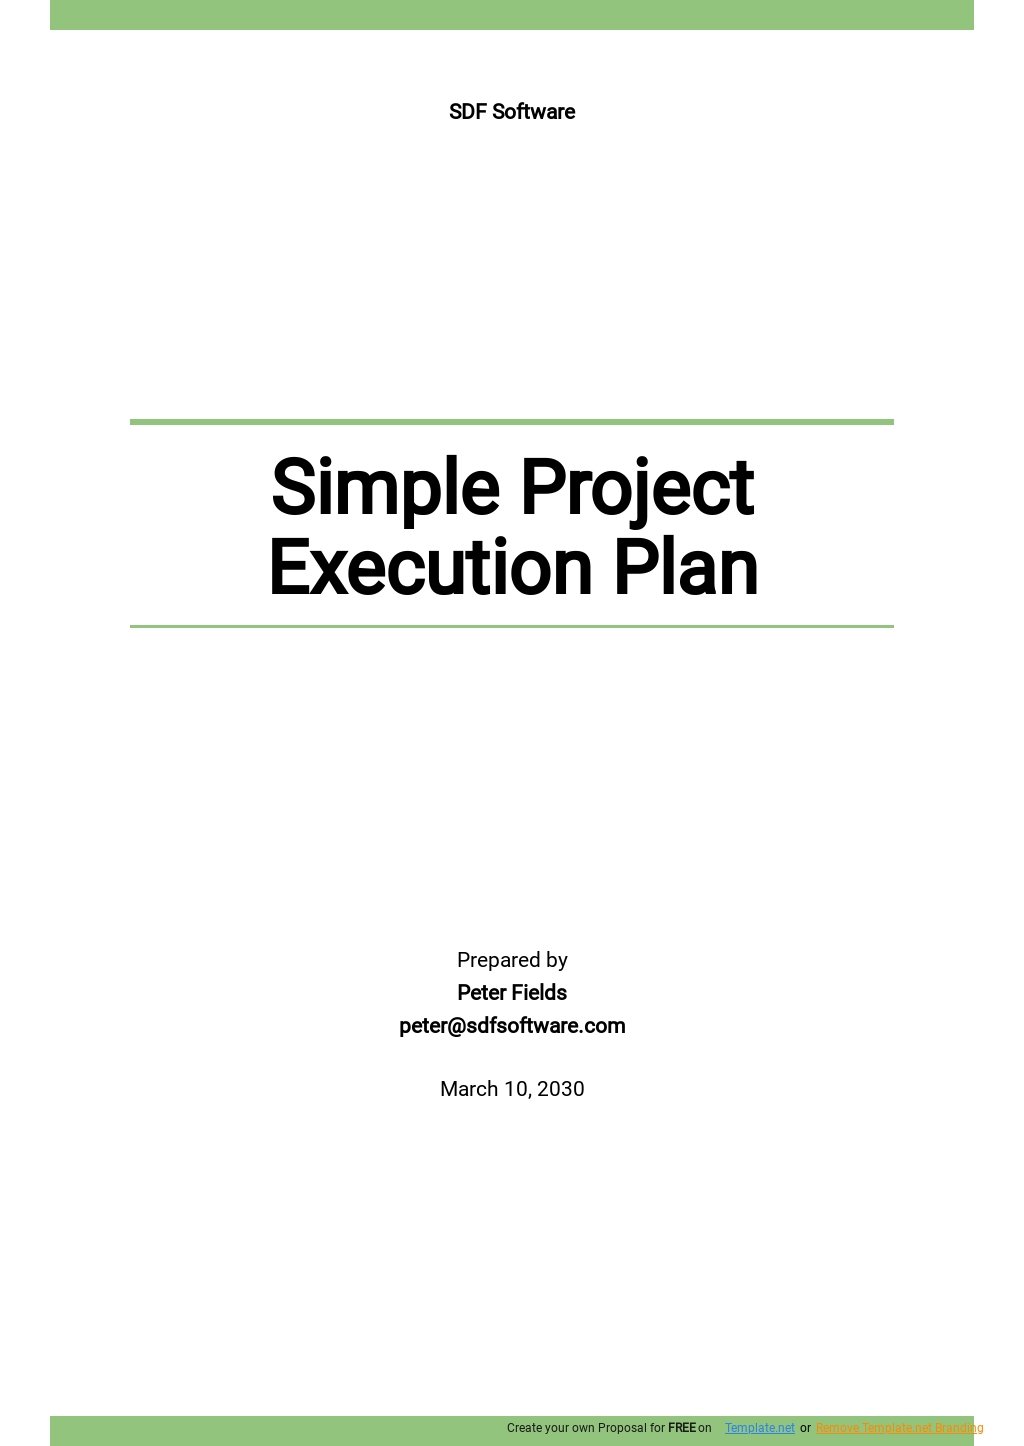 Simple Project Execution Plan Template.jpe